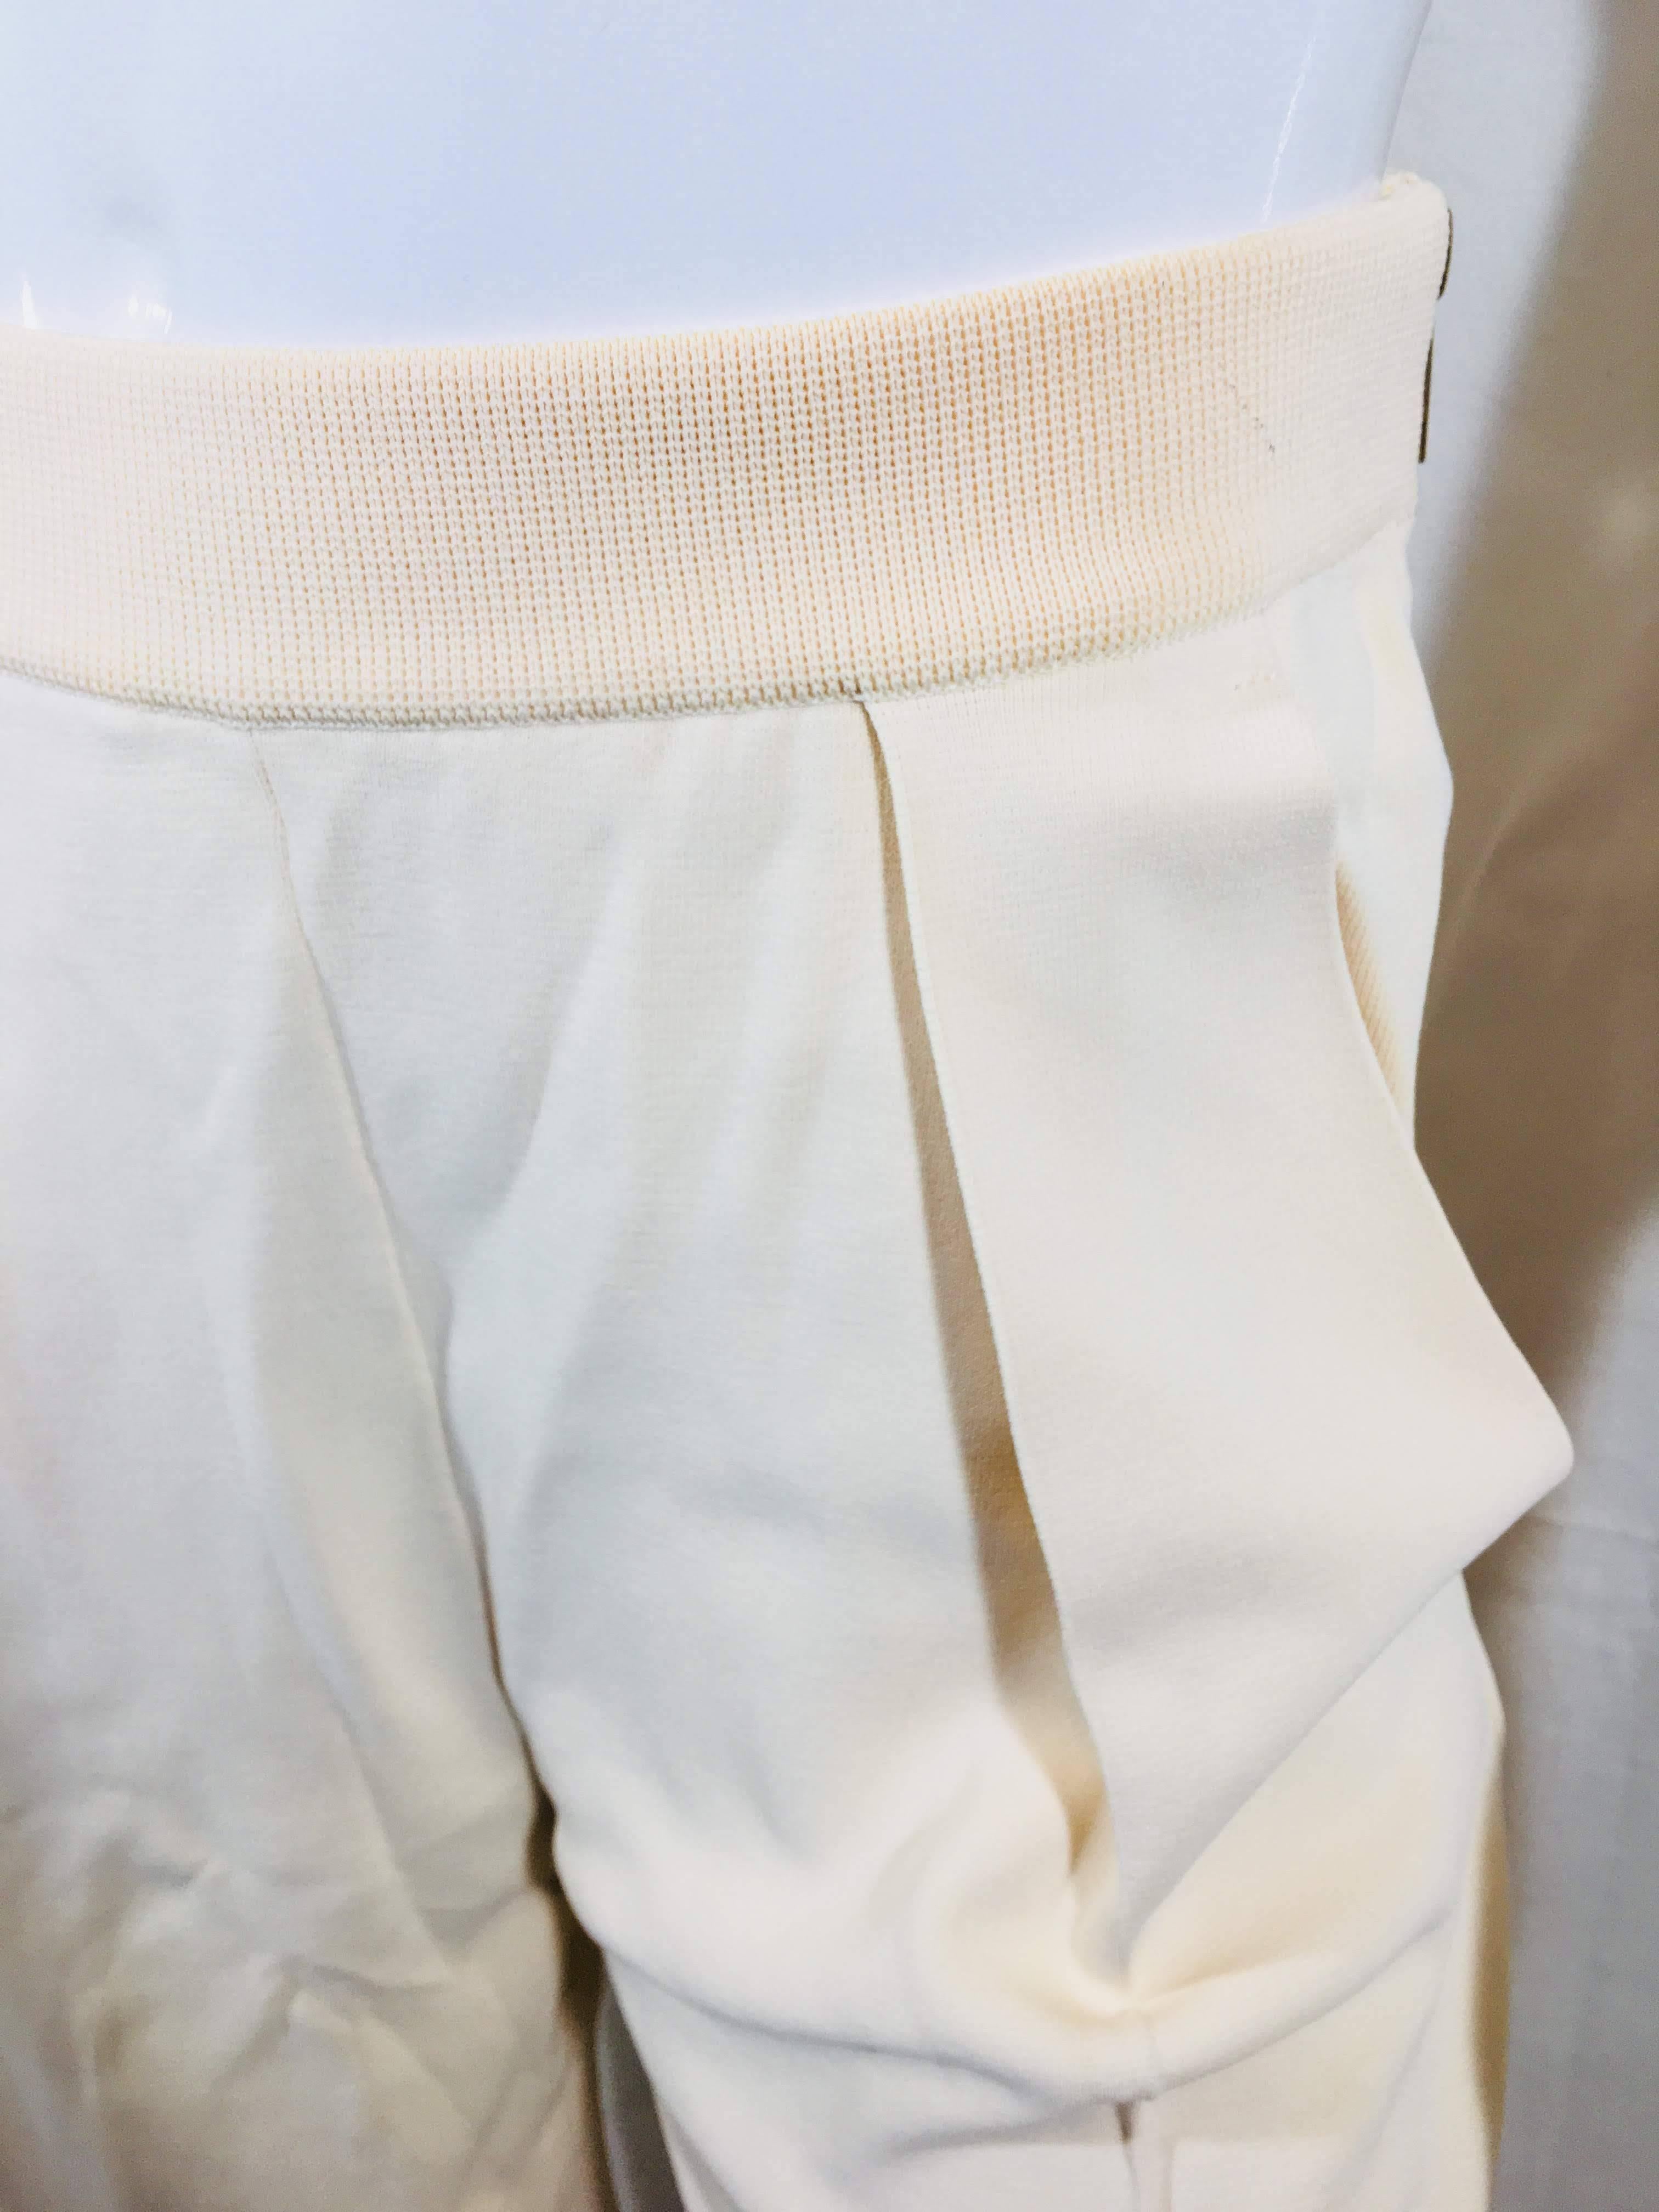 Sonia Rykiel High Rise, Straight Leg Pant with Side Zipper and Thick Waist Band in Cream.